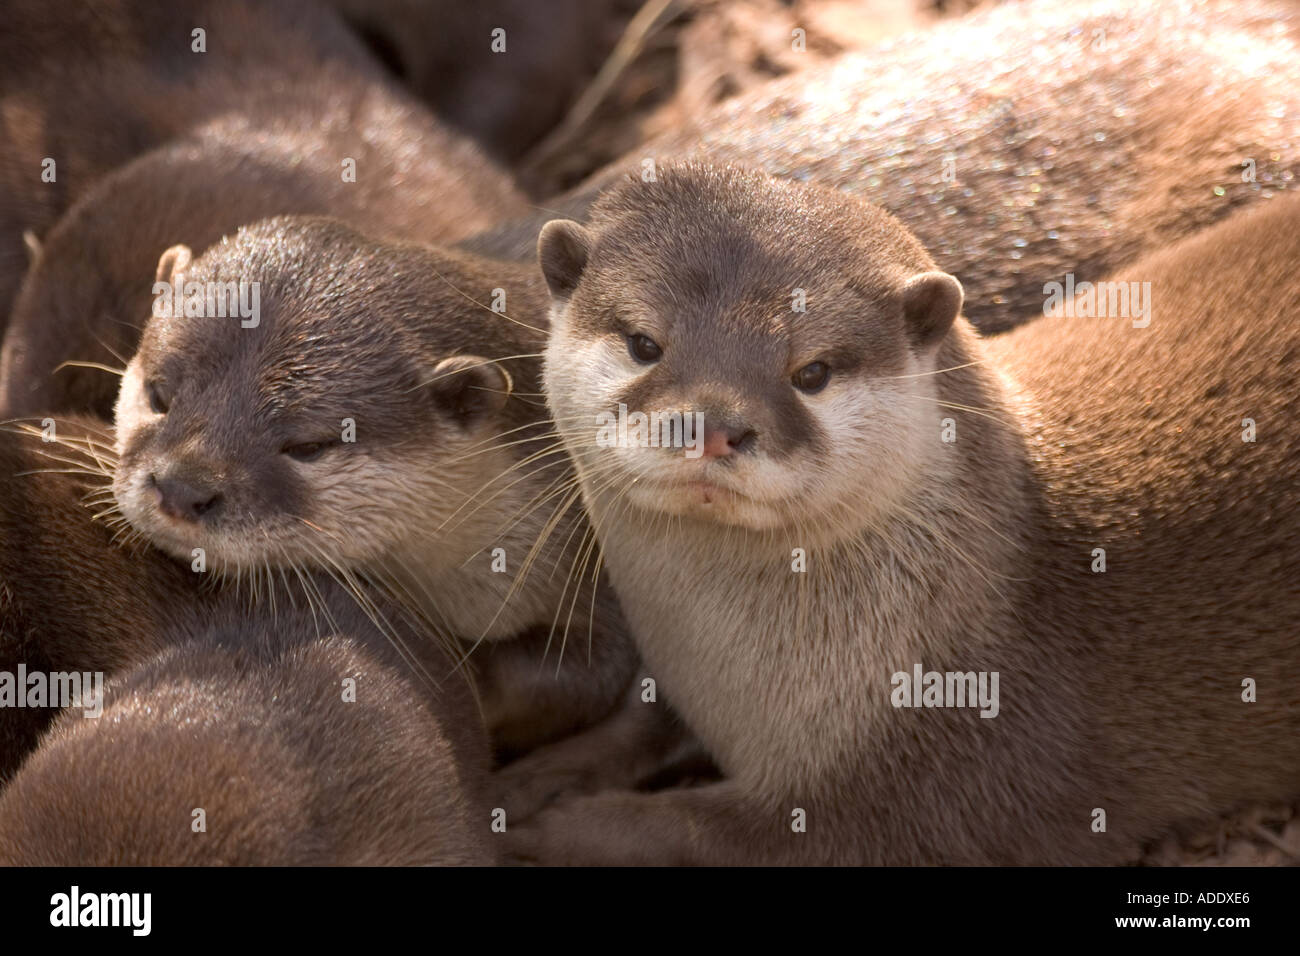 Asian Short Clawed Otter Stock Photo